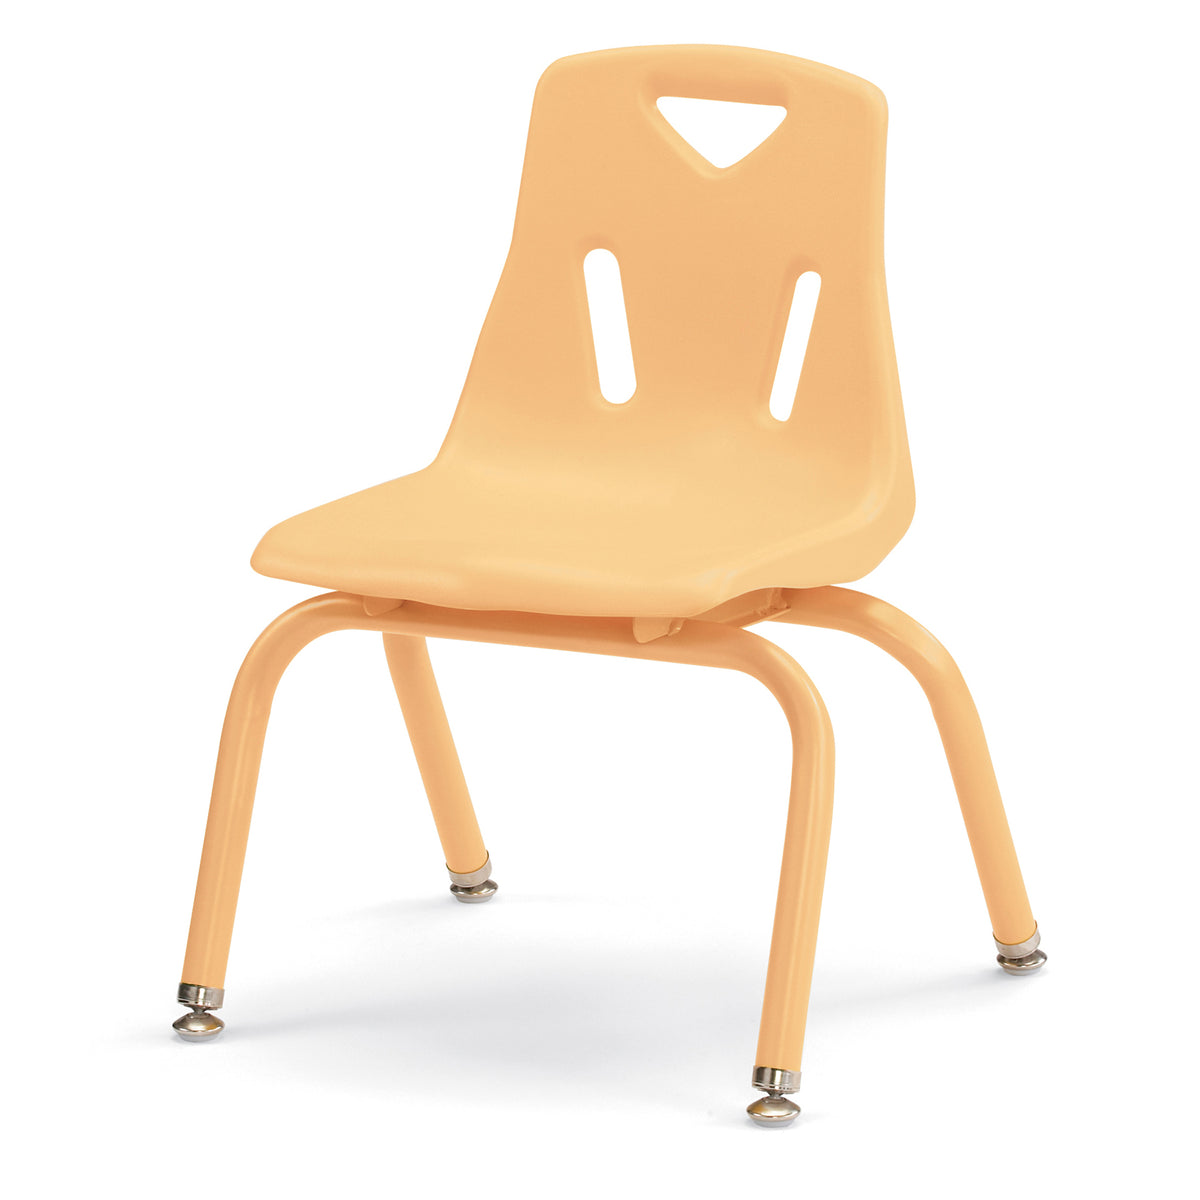 8122JC6251, Berries Stacking Chairs with Powder-Coated Legs - 12" Ht - Set of 6 - Camel